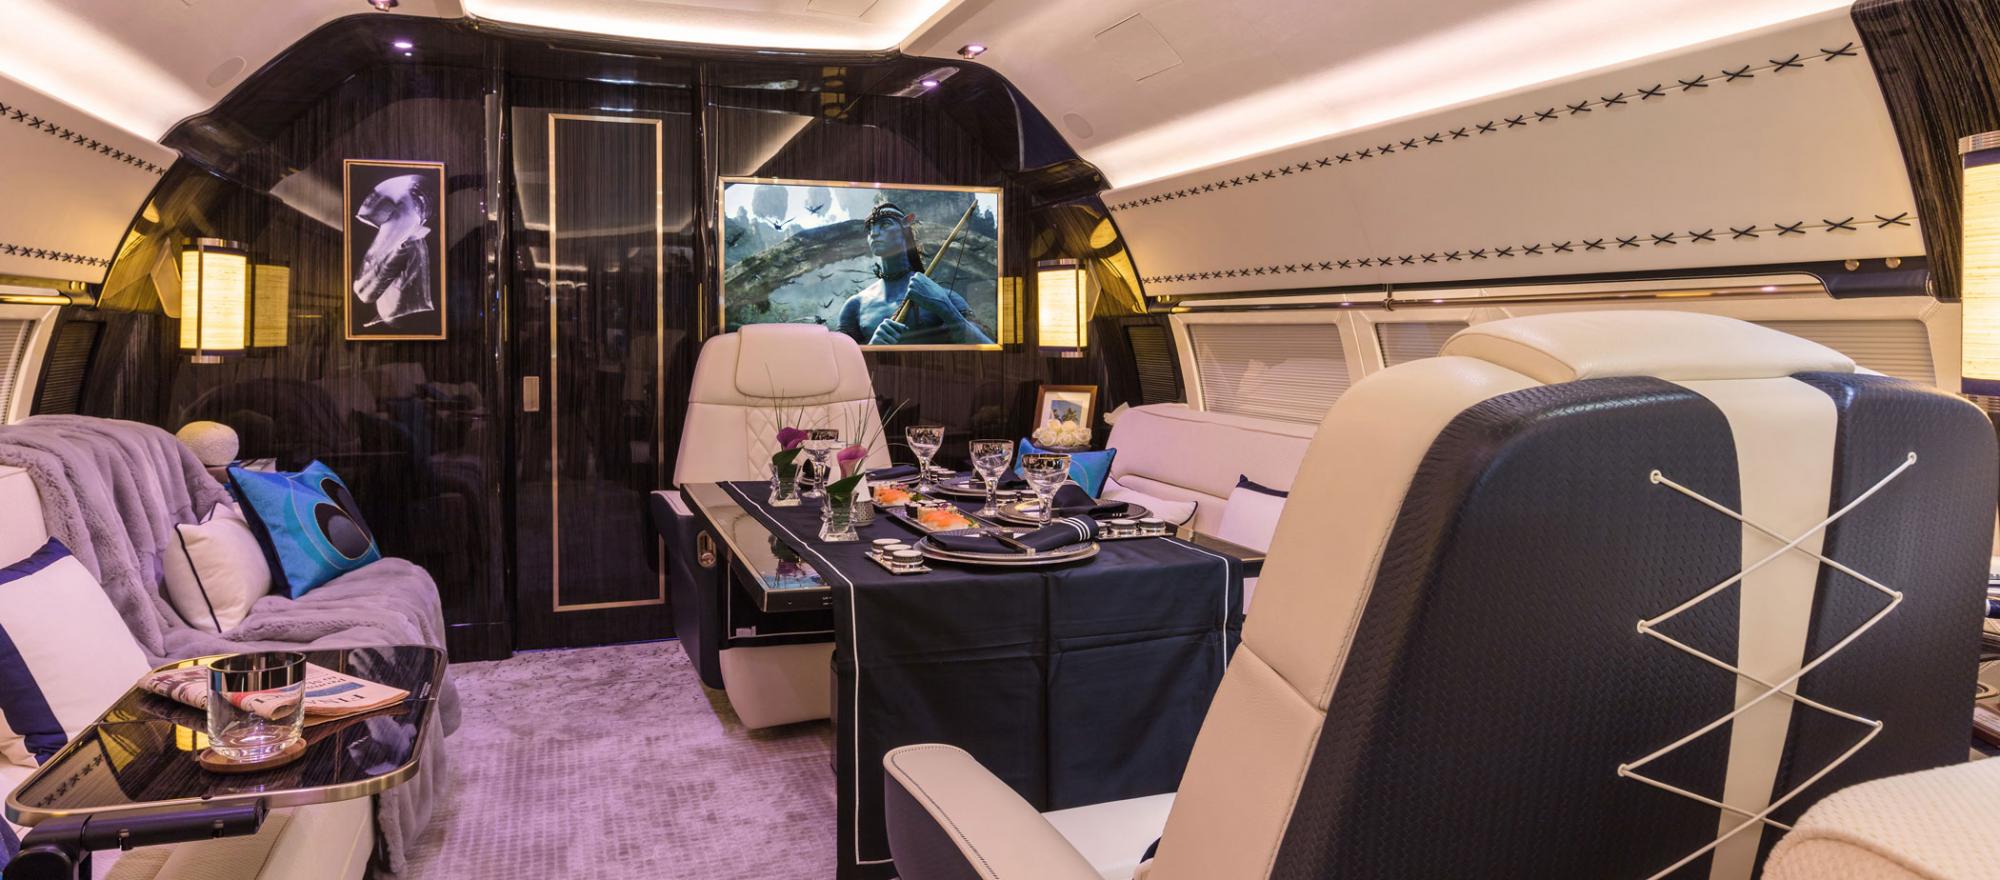 You can dine in style in this elegantly appointed BBJ 1 cabin, a product of Winch Design.